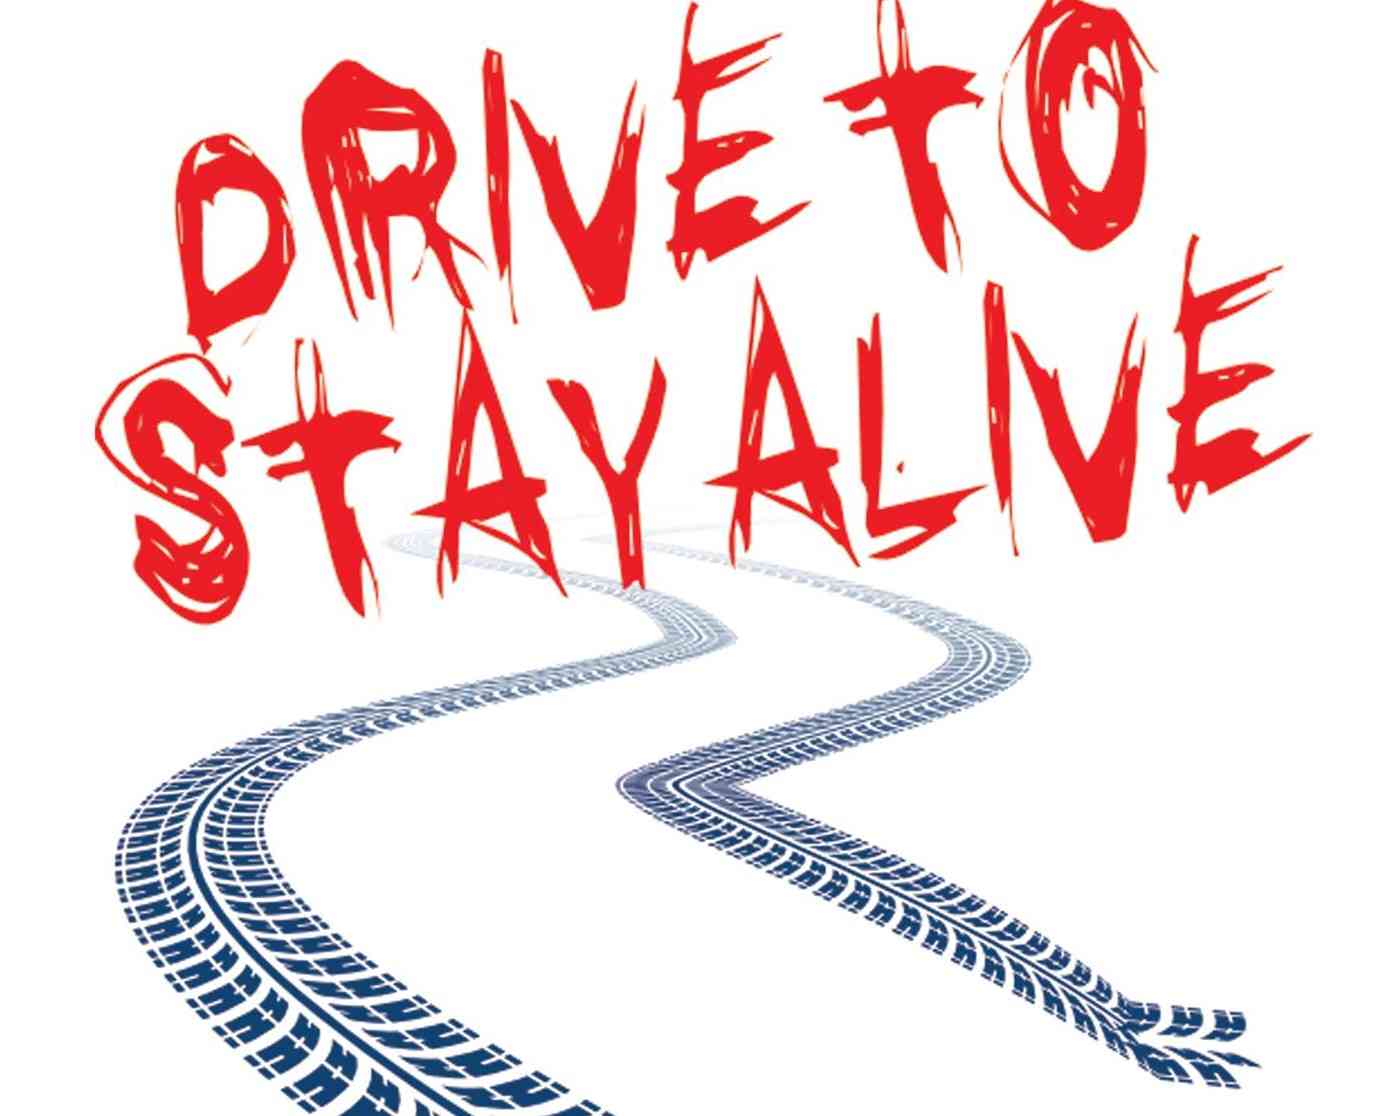 drive to stay alive